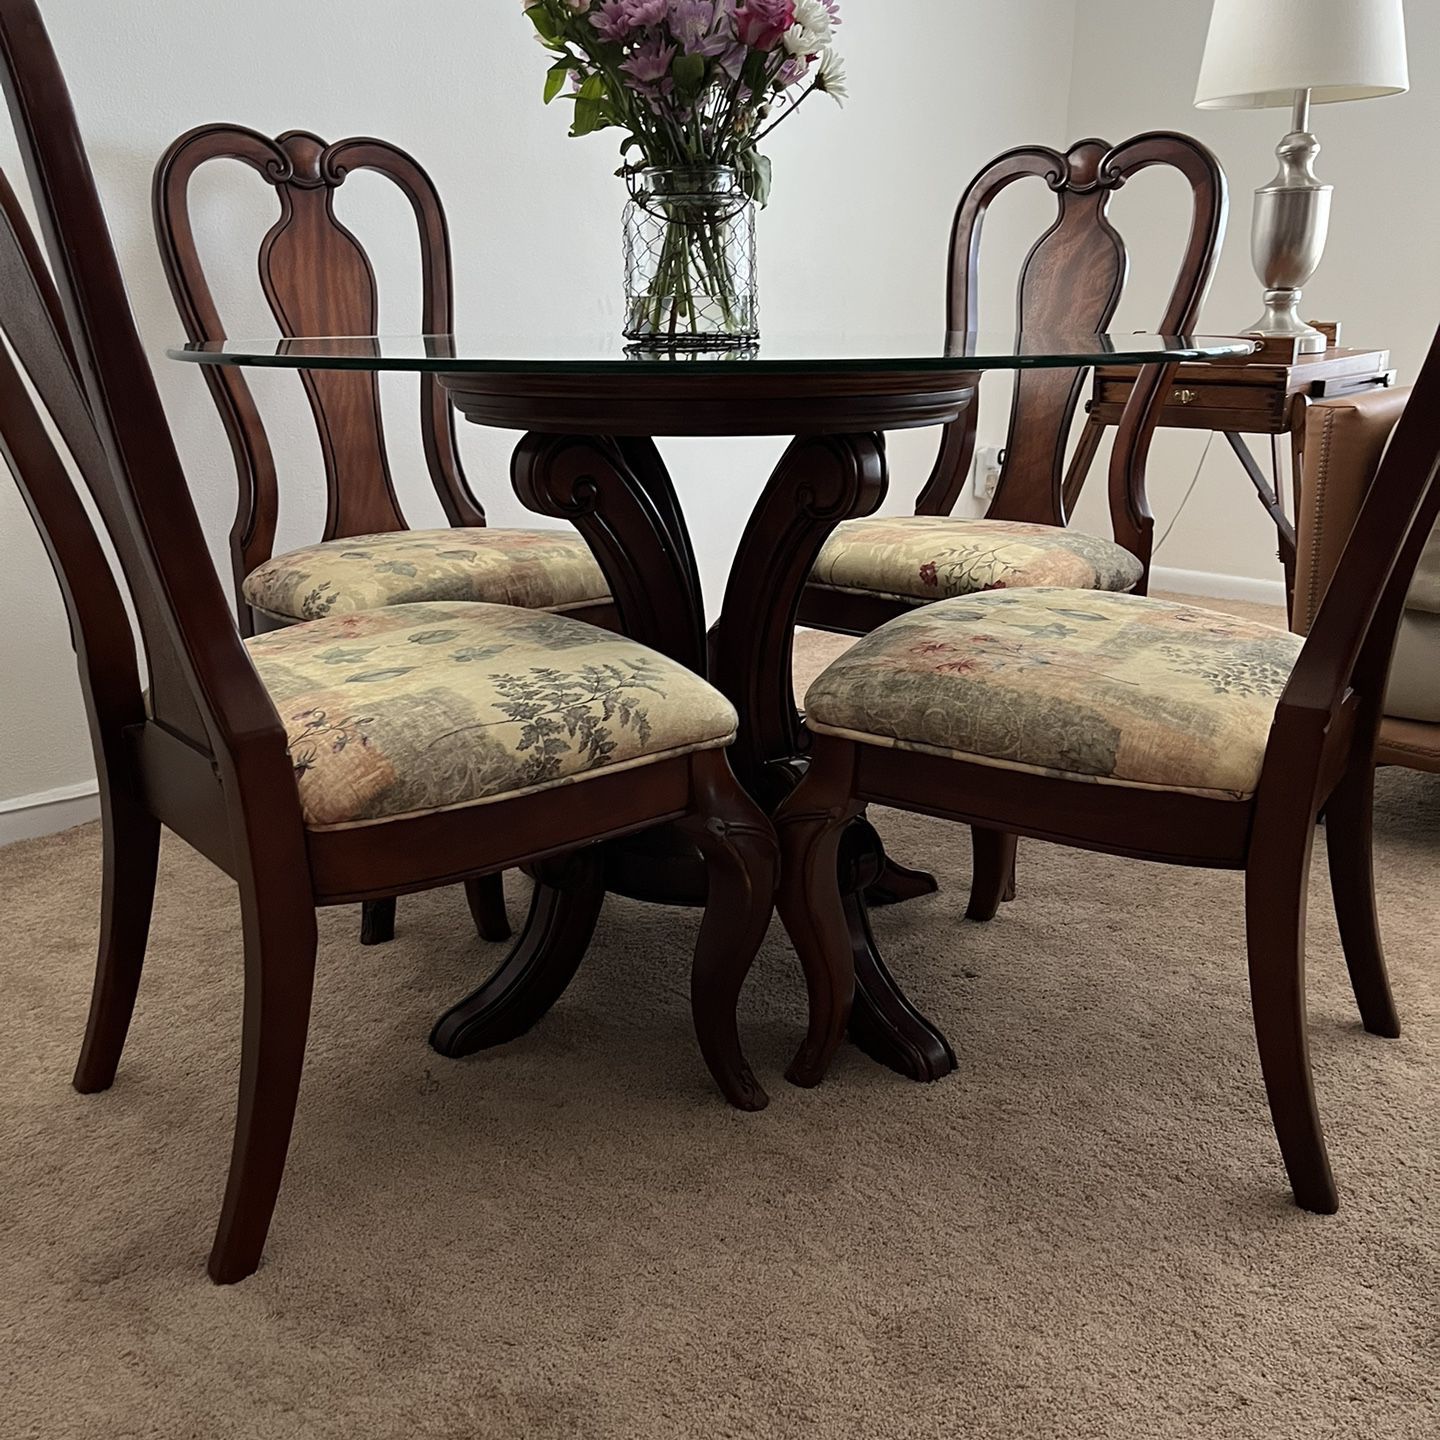 Round Dining Table + Chairs